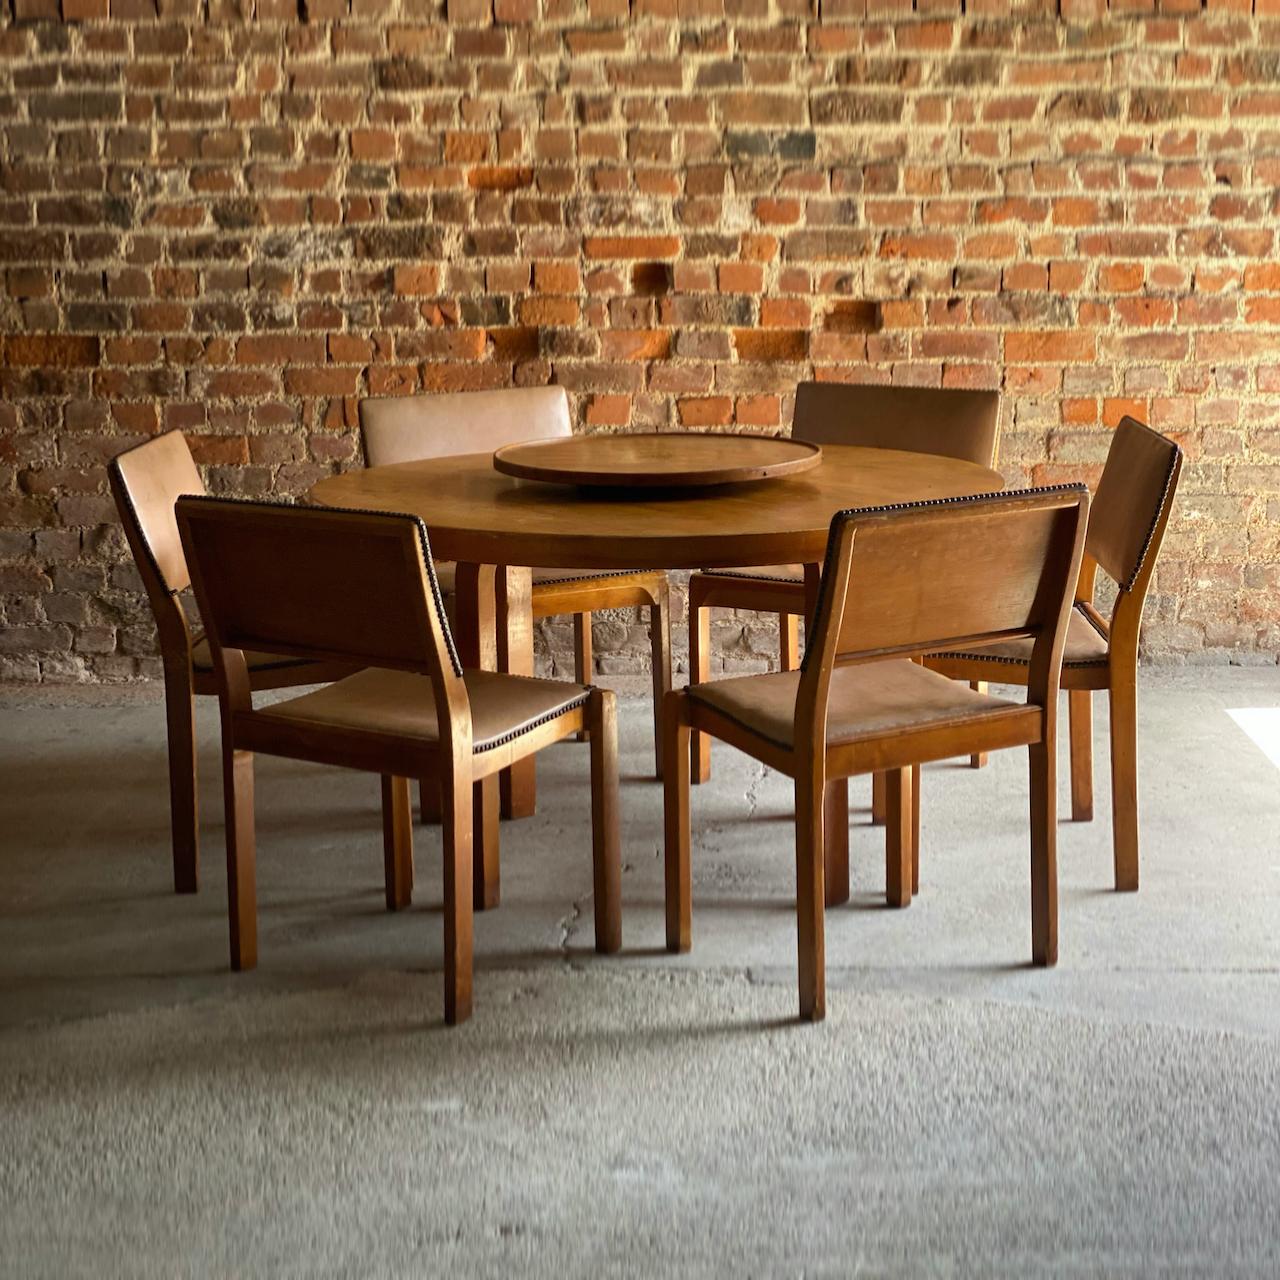 Alvar Aalto Model 91 dining table & six chairs by Finmar Circa 1940.

Magnificent and extremely rare Alvar Aalto Model 91 dining table & six chairs manufactured by Finmar Ltd Finland circa 1940, the beautiful circular Model 91 dining table made